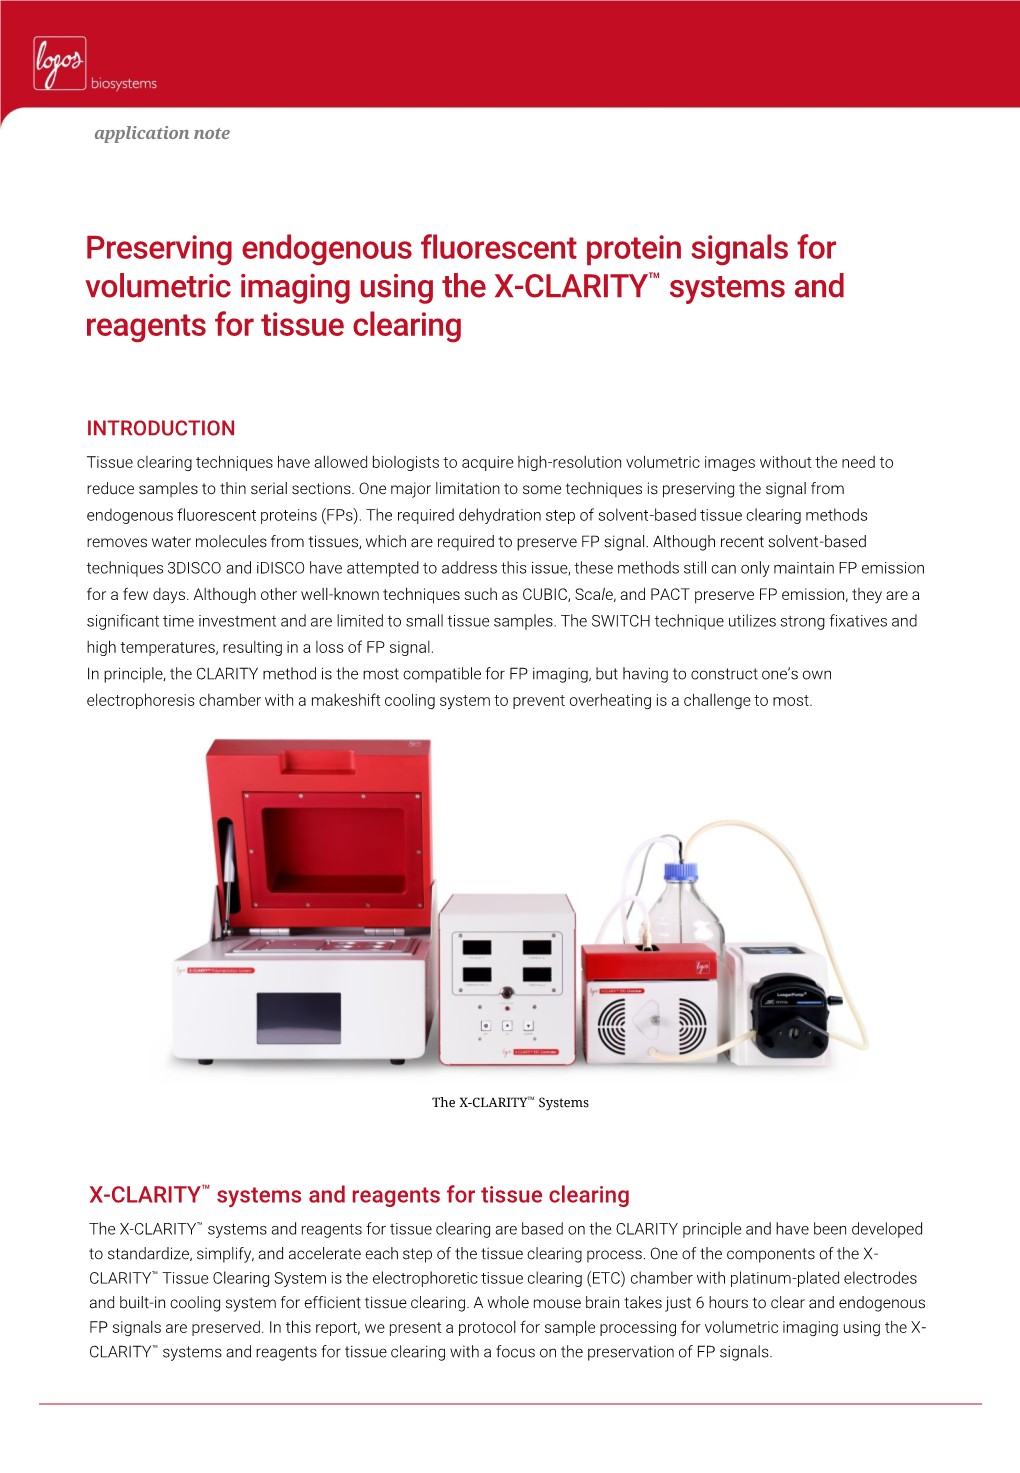 Preserving Endogenous Fluorescent Protein Signals for Volumetric Imaging Using the X-CLARITY™ Systems and Reagents for Tissue Clearing